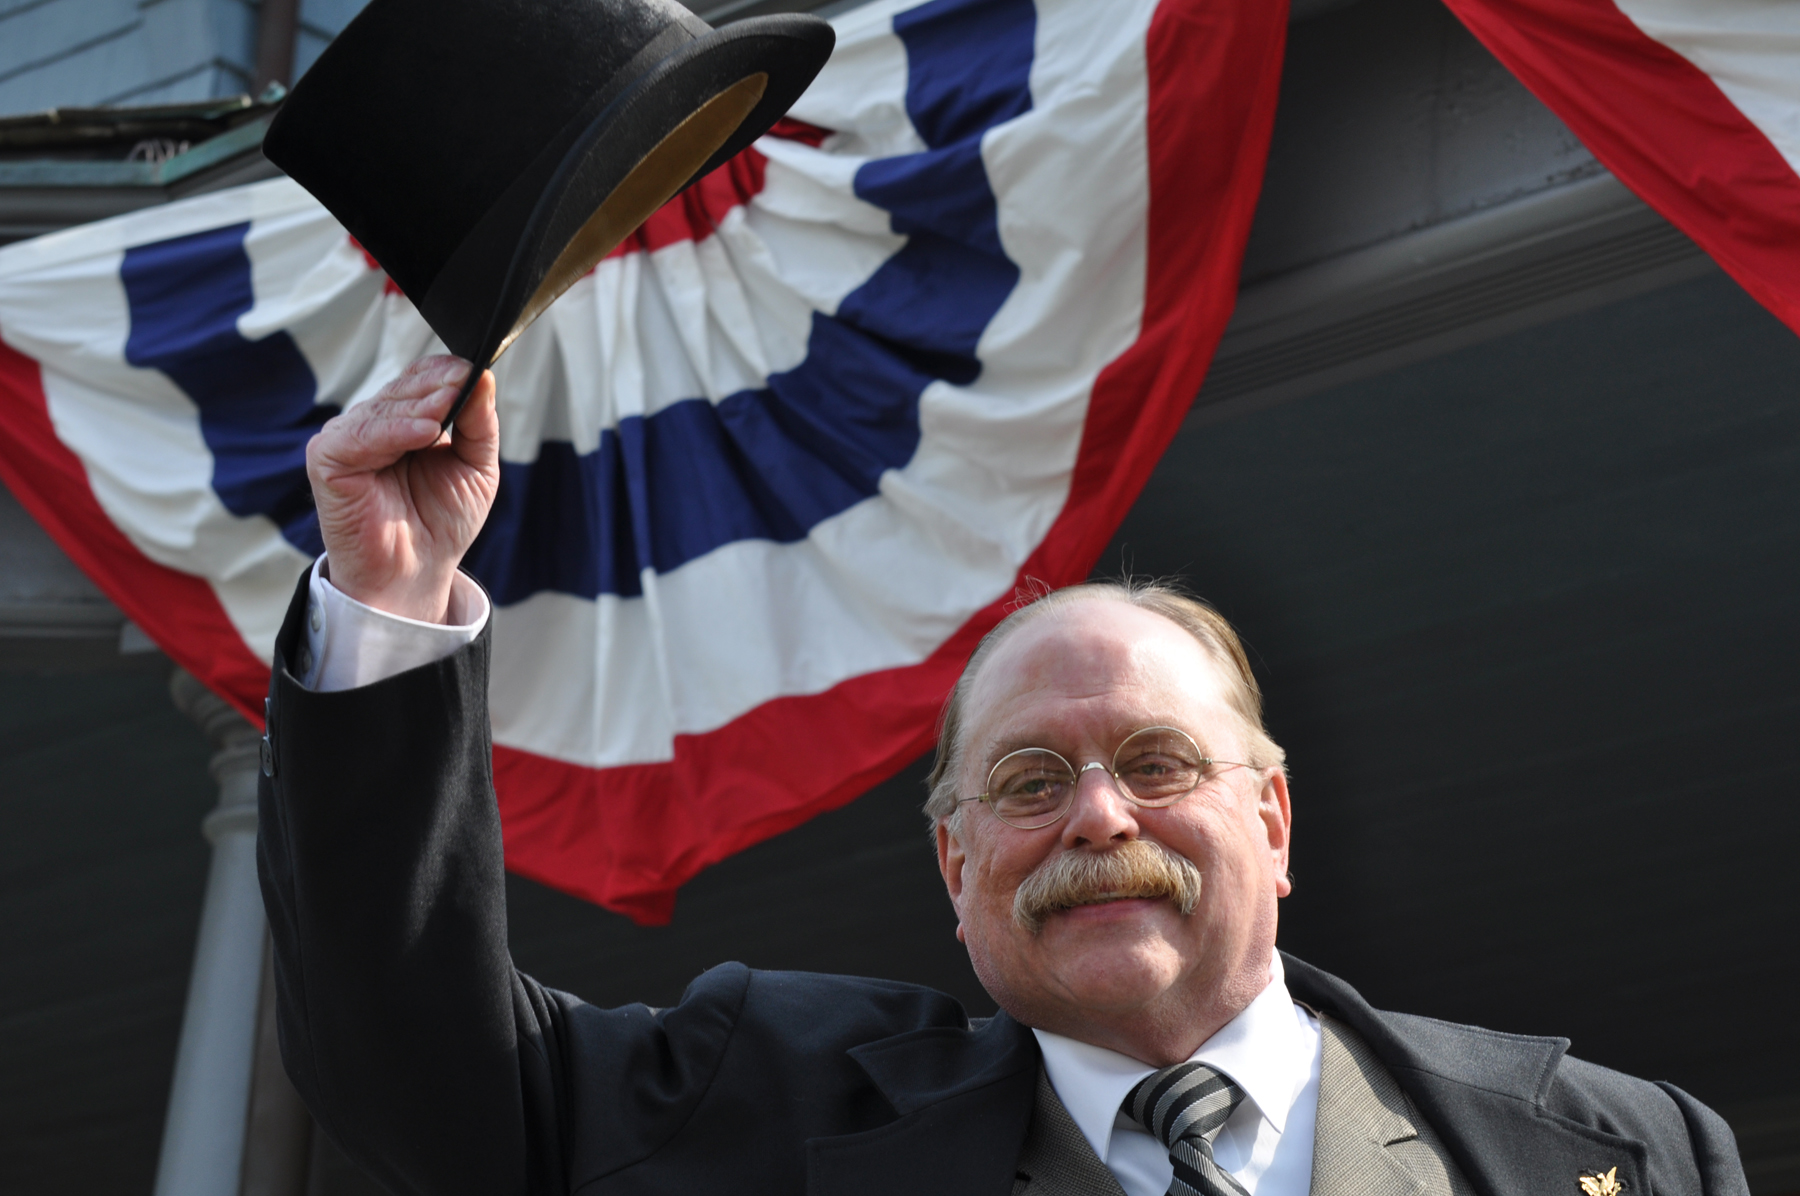 Theodore Roosevelt (played by Jim Foote) on the Fourth of July NPS Photo